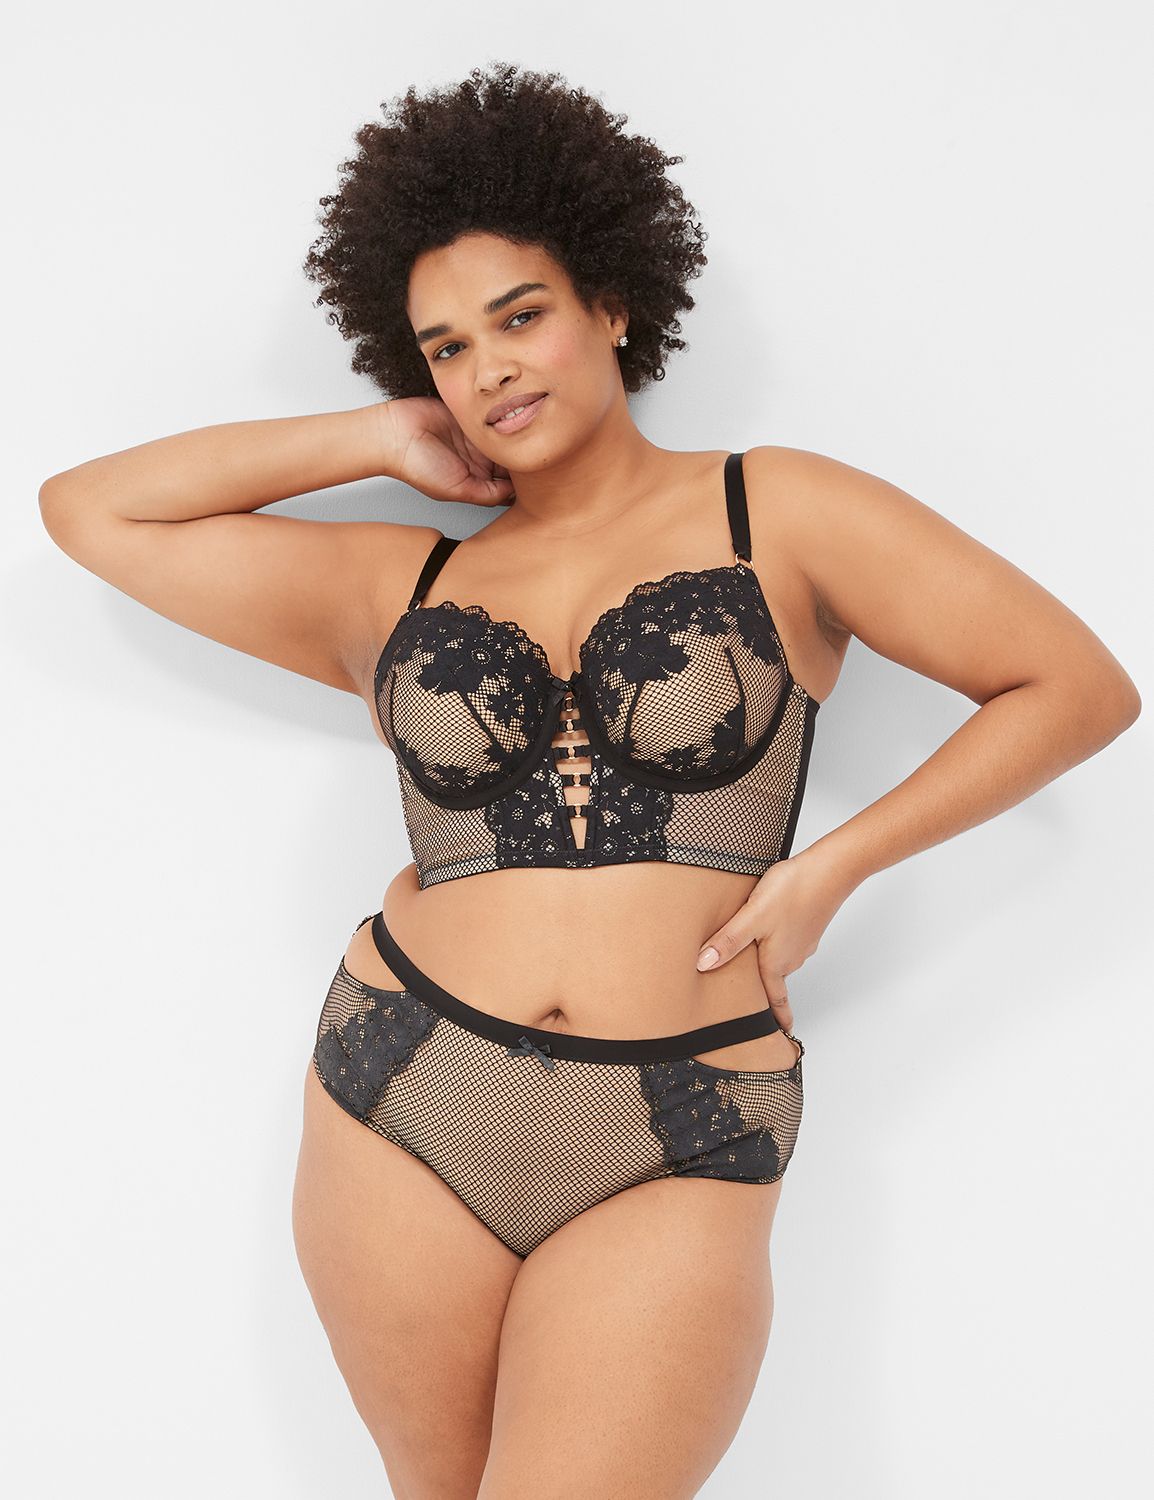 Plus Size Lingerie Set for Women, Sexy Underwire Bras and Panties